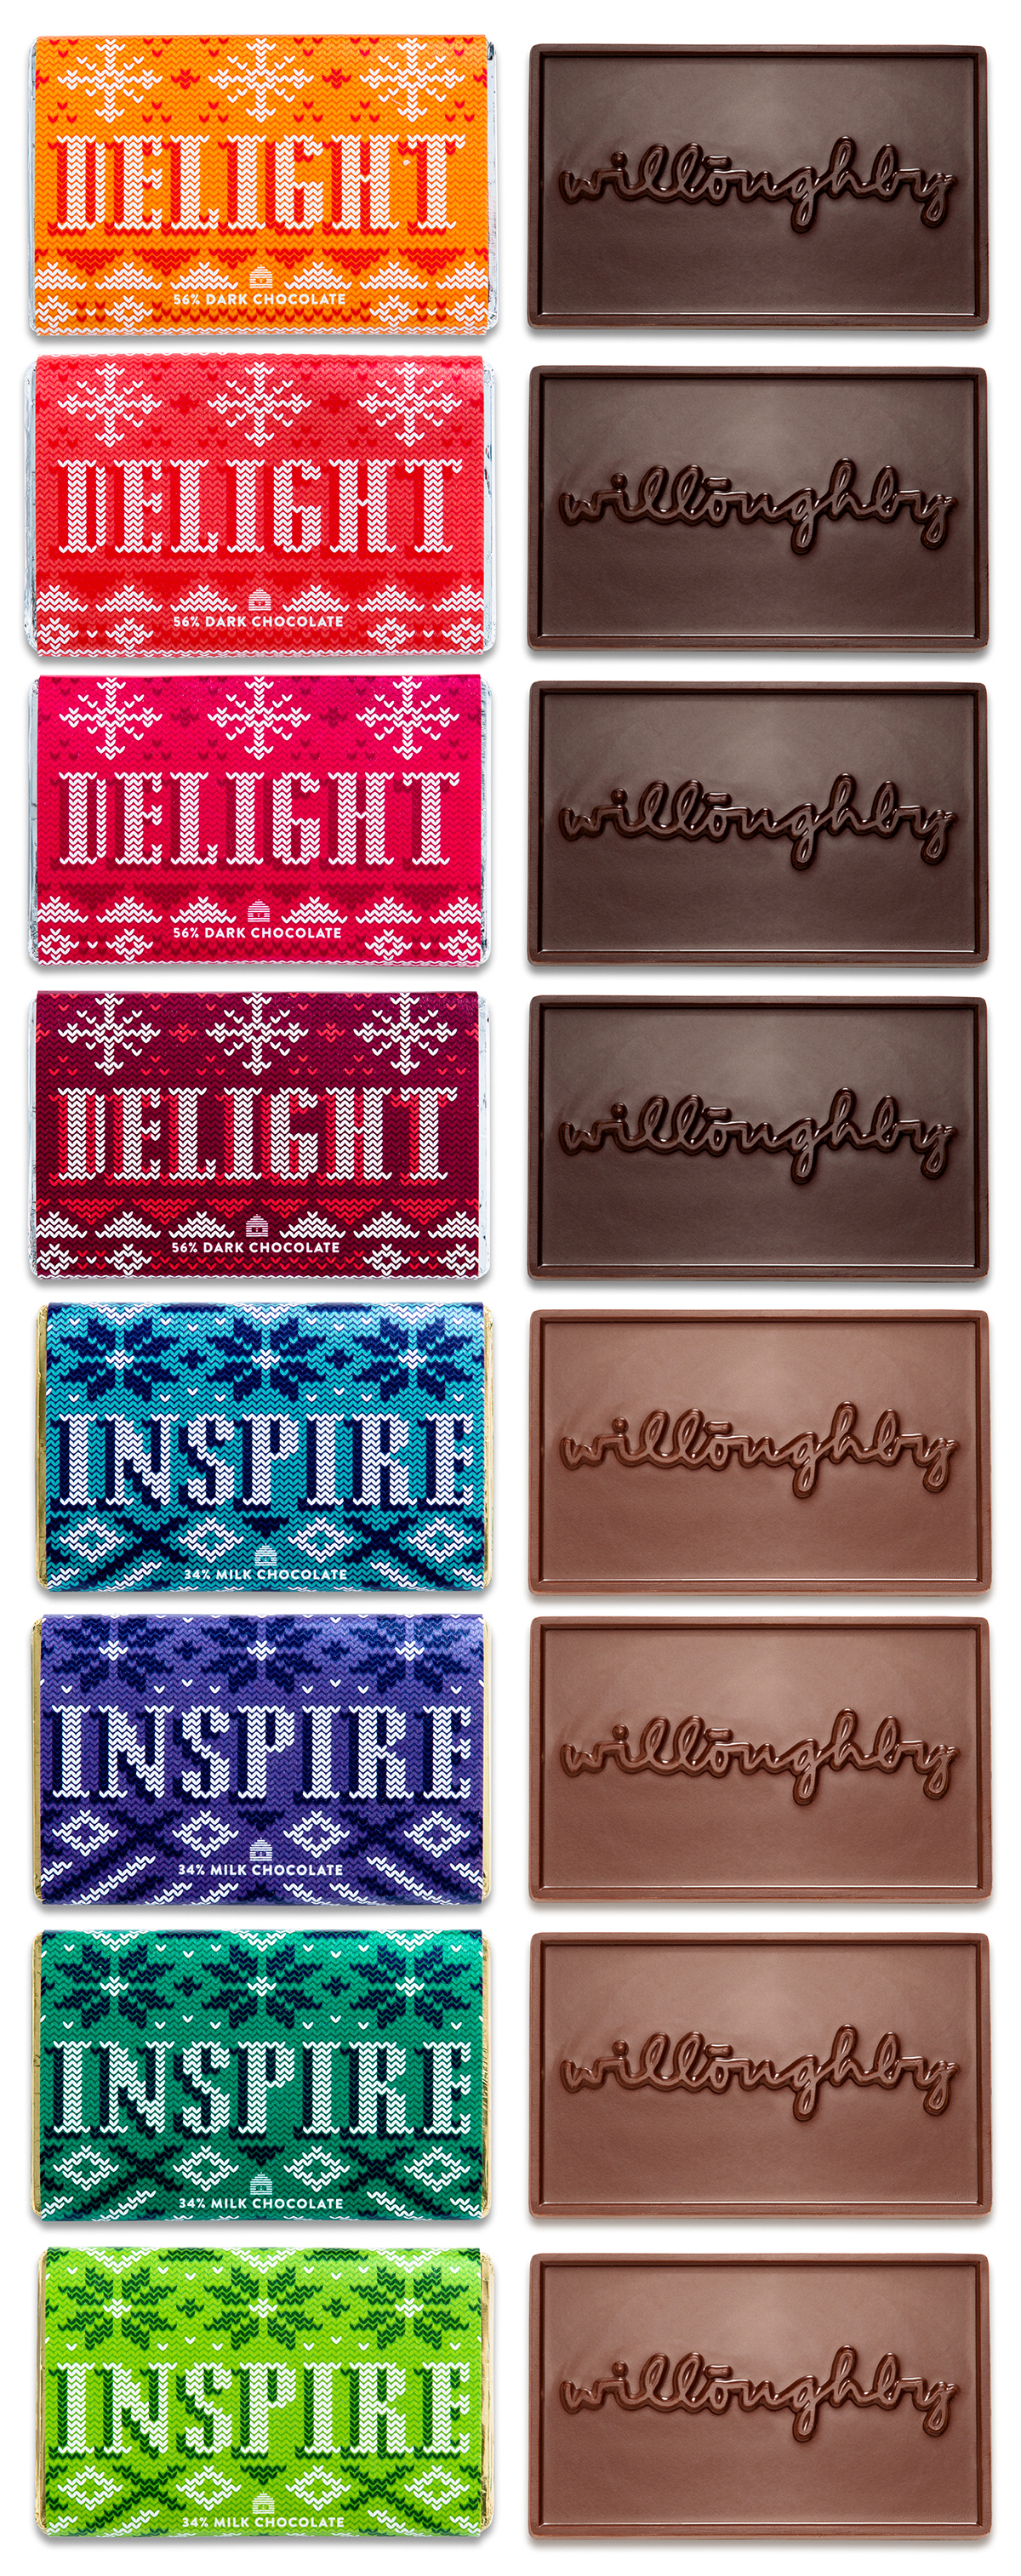 chocolate chocolate packaging Chocolate Wrapper wrapper Holiday seasonal milk chocolate dark chocolate Willoughby Christmas chocolate bar letterpress holiday card stitching Embroidery